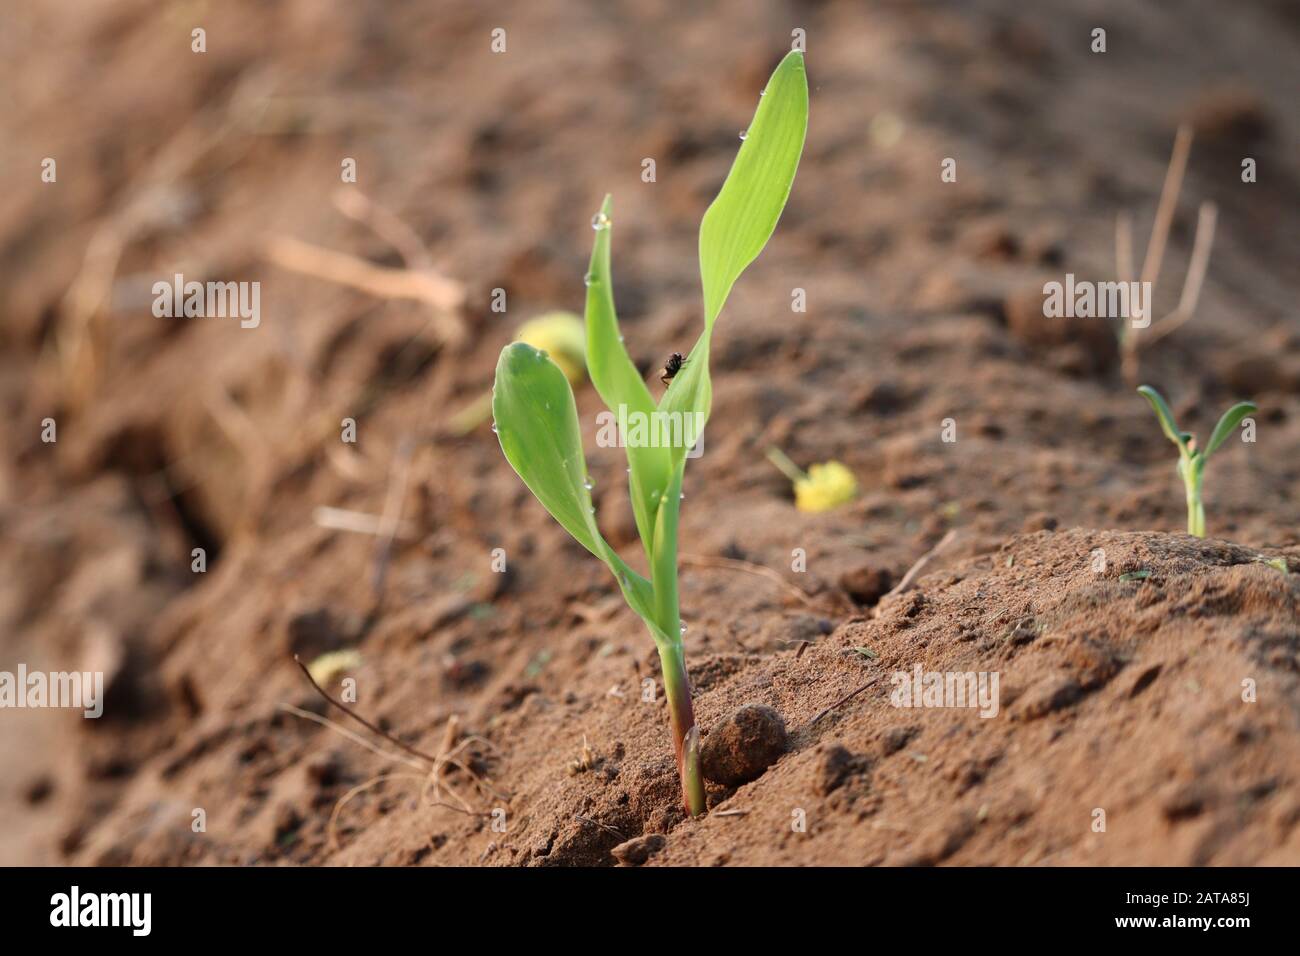 Agriculture. Growing plants. corn Plant seedling. Hand nurturing and watering young baby plants growing in germination sequence on fertile soil with n Stock Photo